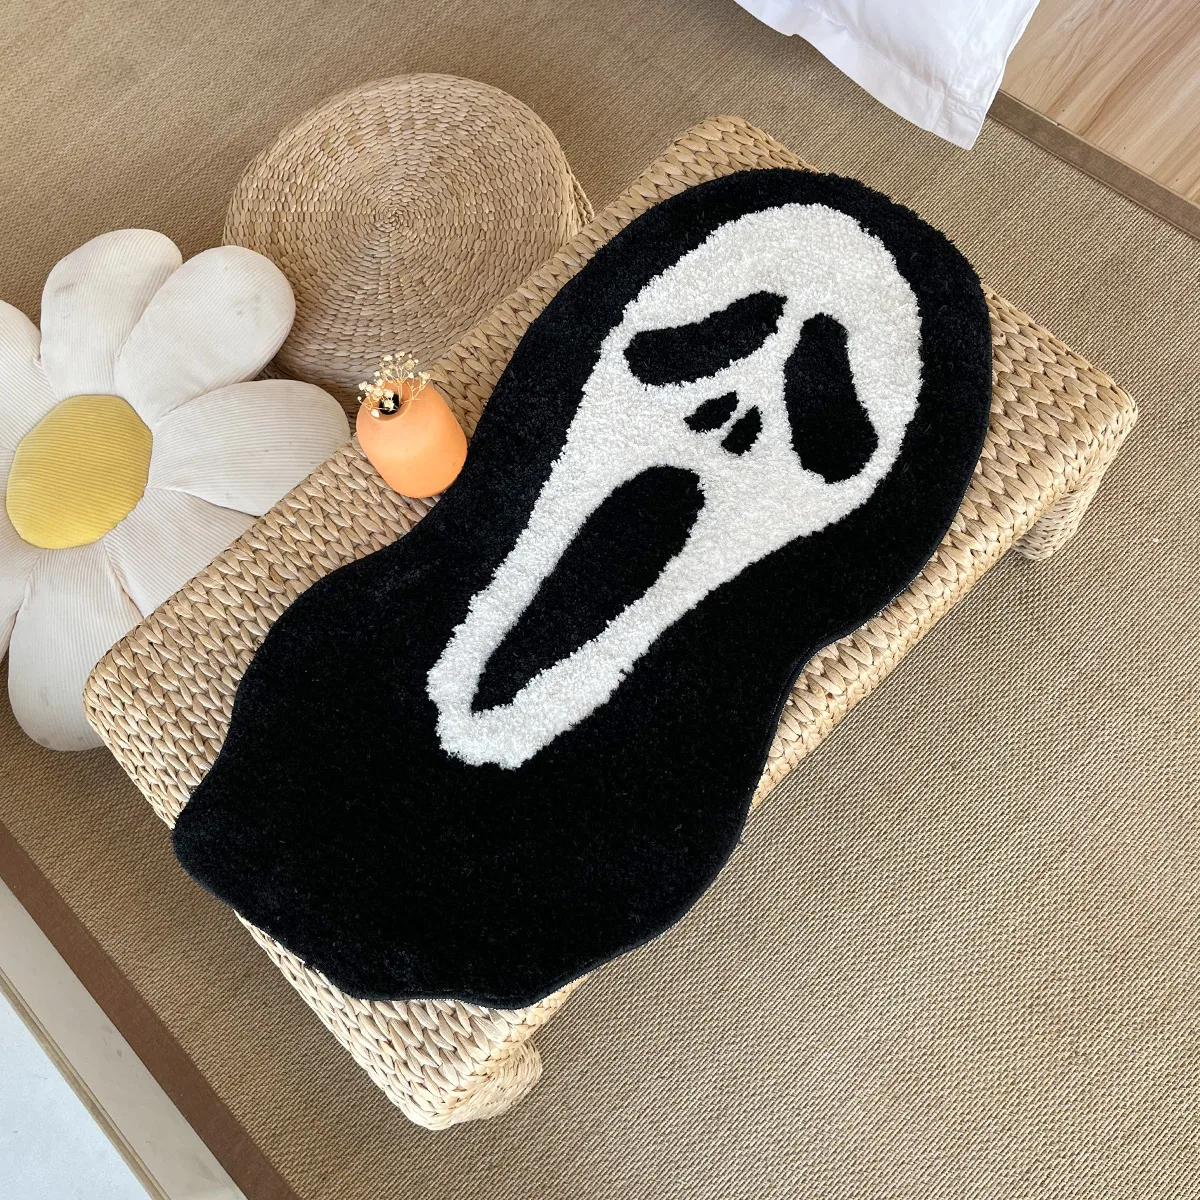 

Scream Rug Handmade Horror Character Rugs Halloween Decoration Ghost Face Dread Themed and Black and White Colors Killer